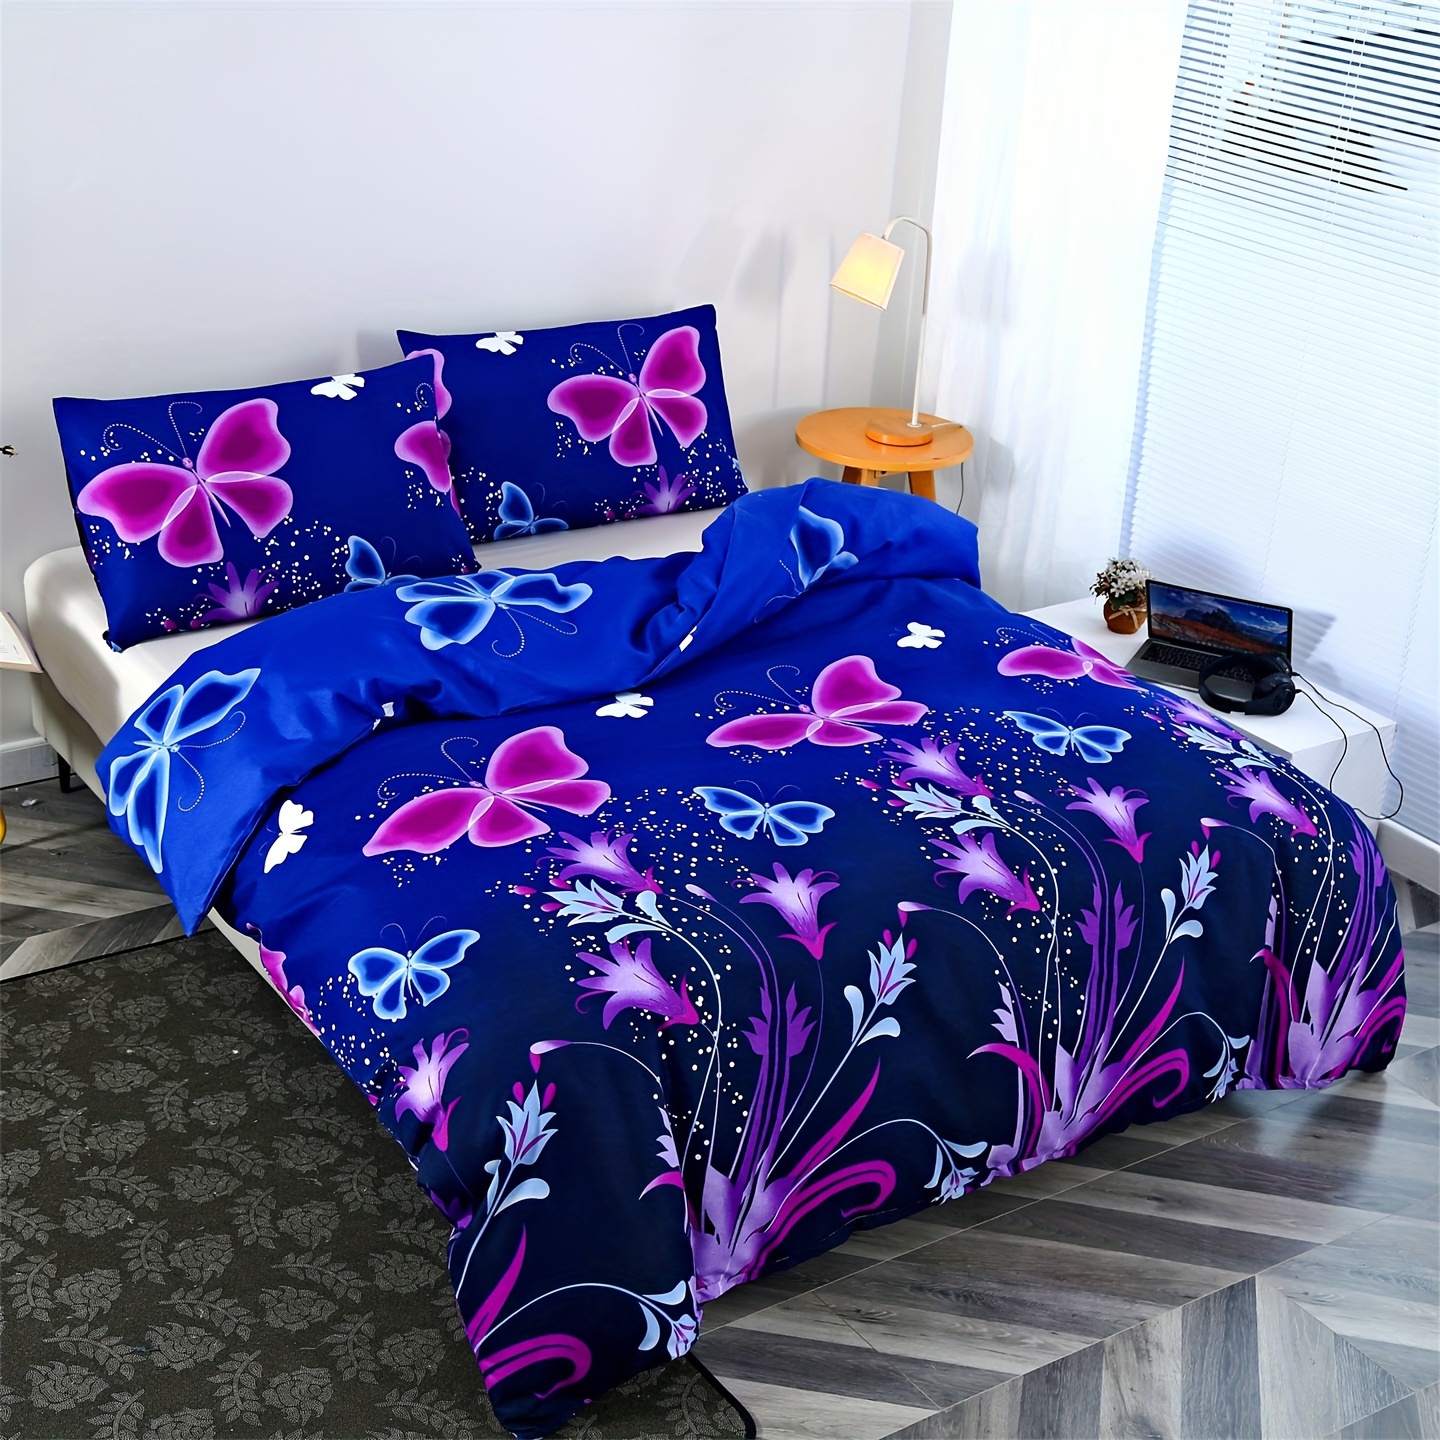 

3-piece Maple Leaf Print Soft & Cozy Bedding Set - Includes Comforter Cover And 2 Pillowcases, Breathable Polyester, Zip Closure - Perfect For Bedroom And Guest Room